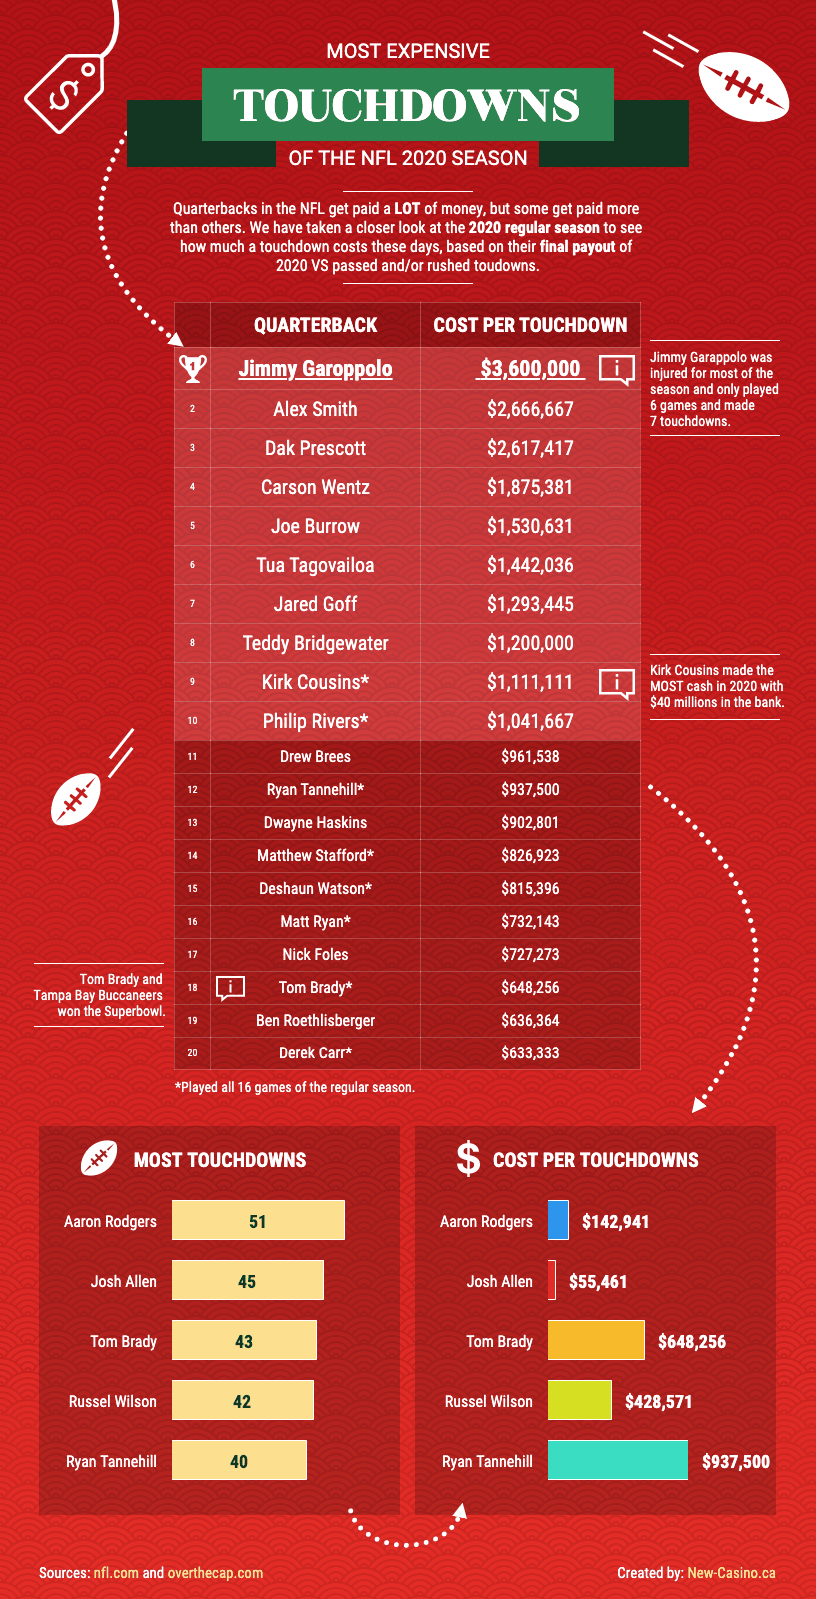 Most Expensive Touchdowns